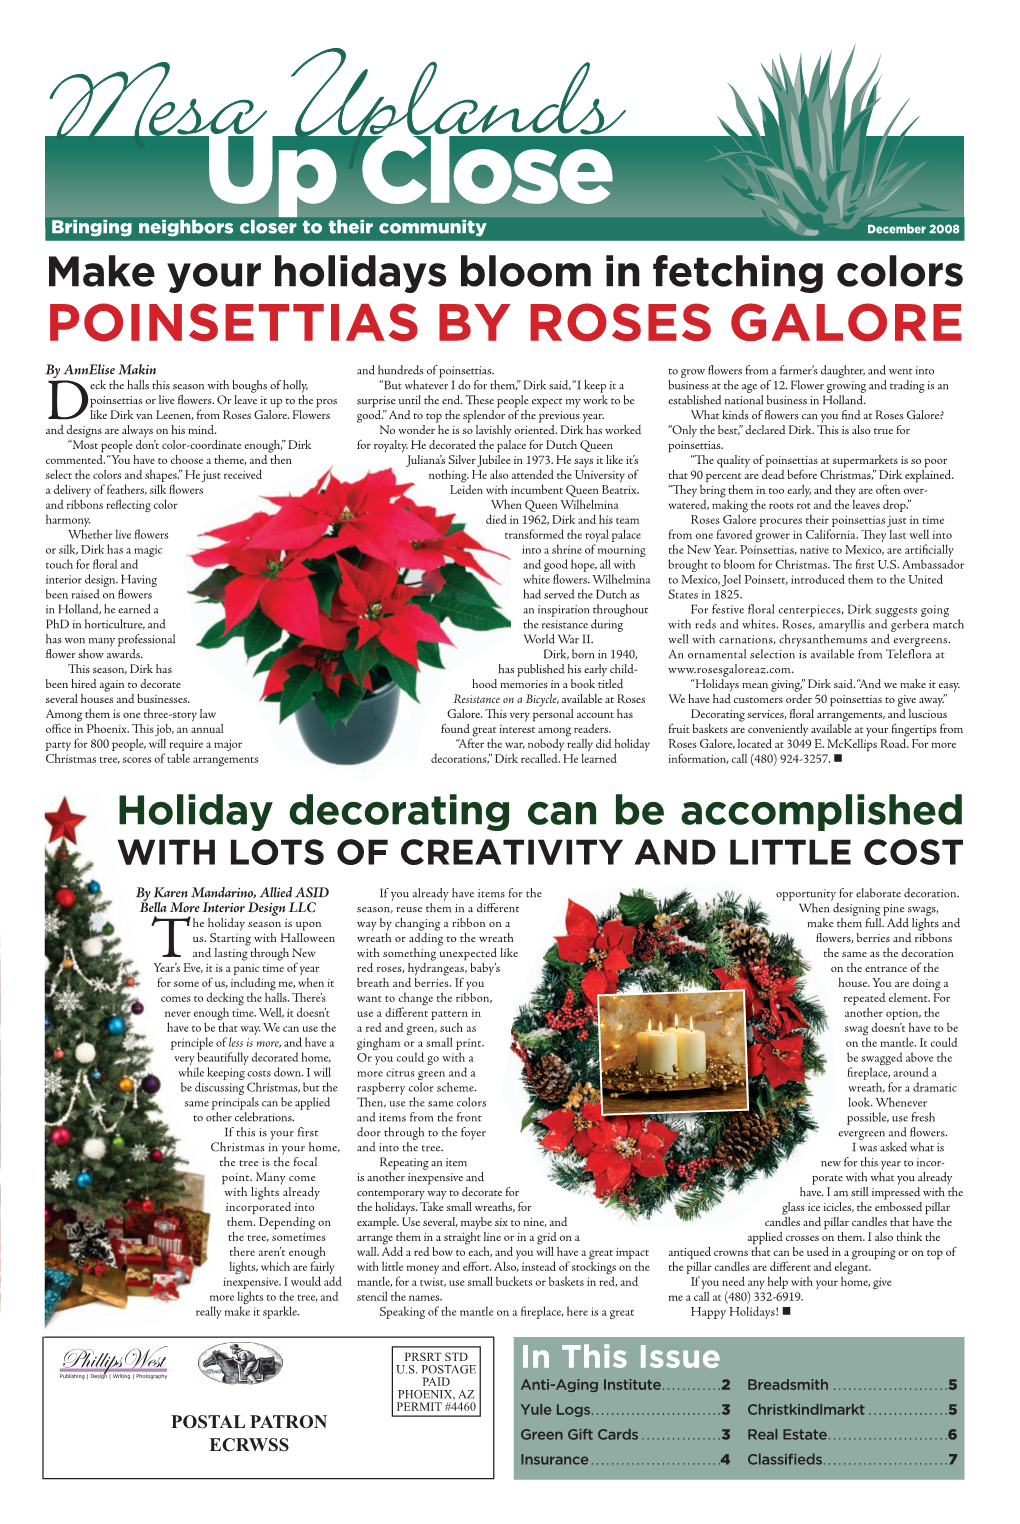 Poinsettias by Roses Galore